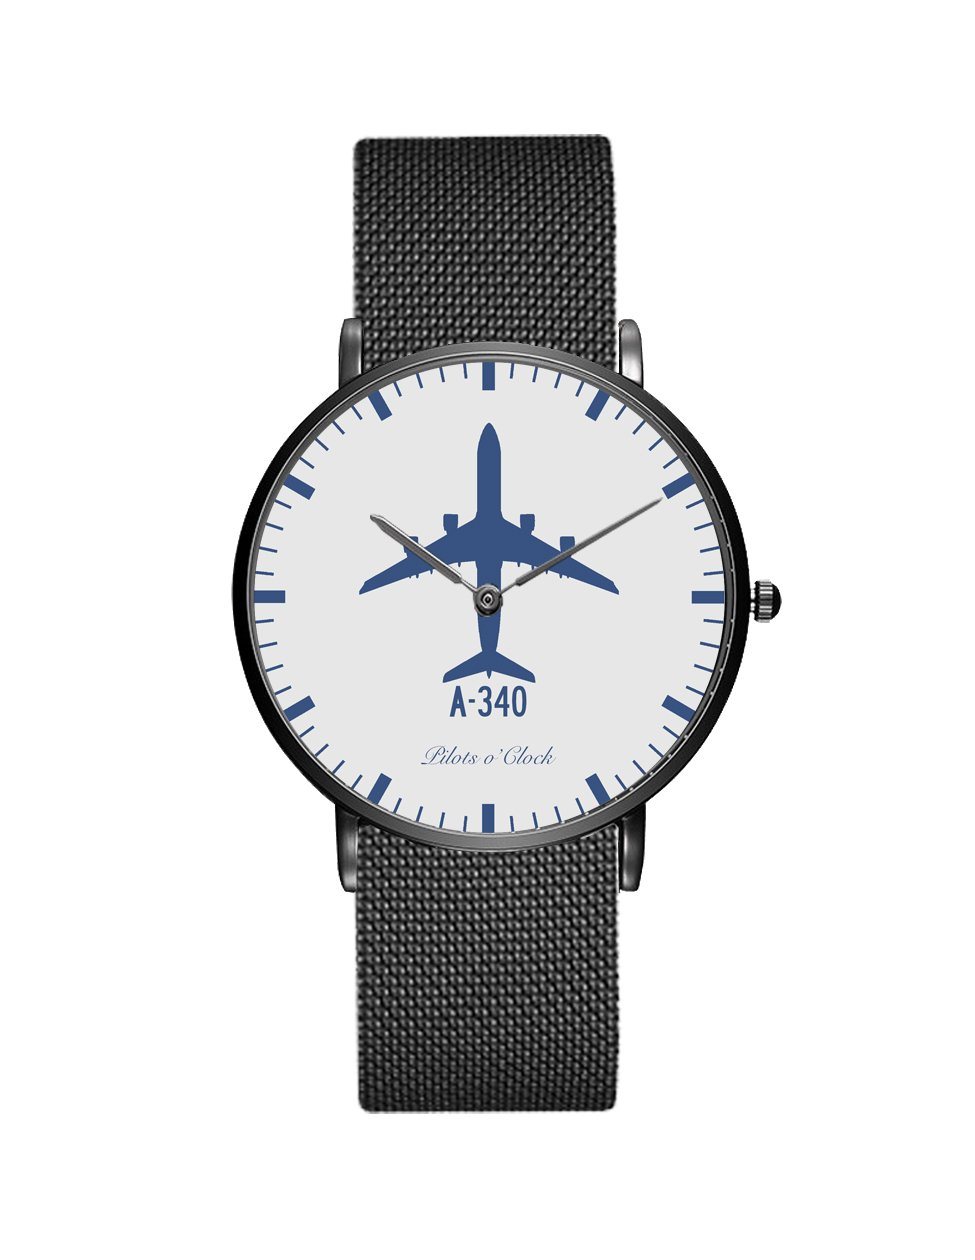 Airbus A340 Stainless Steel Strap Watches Pilot Eyes Store Black & Stainless Steel Strap 